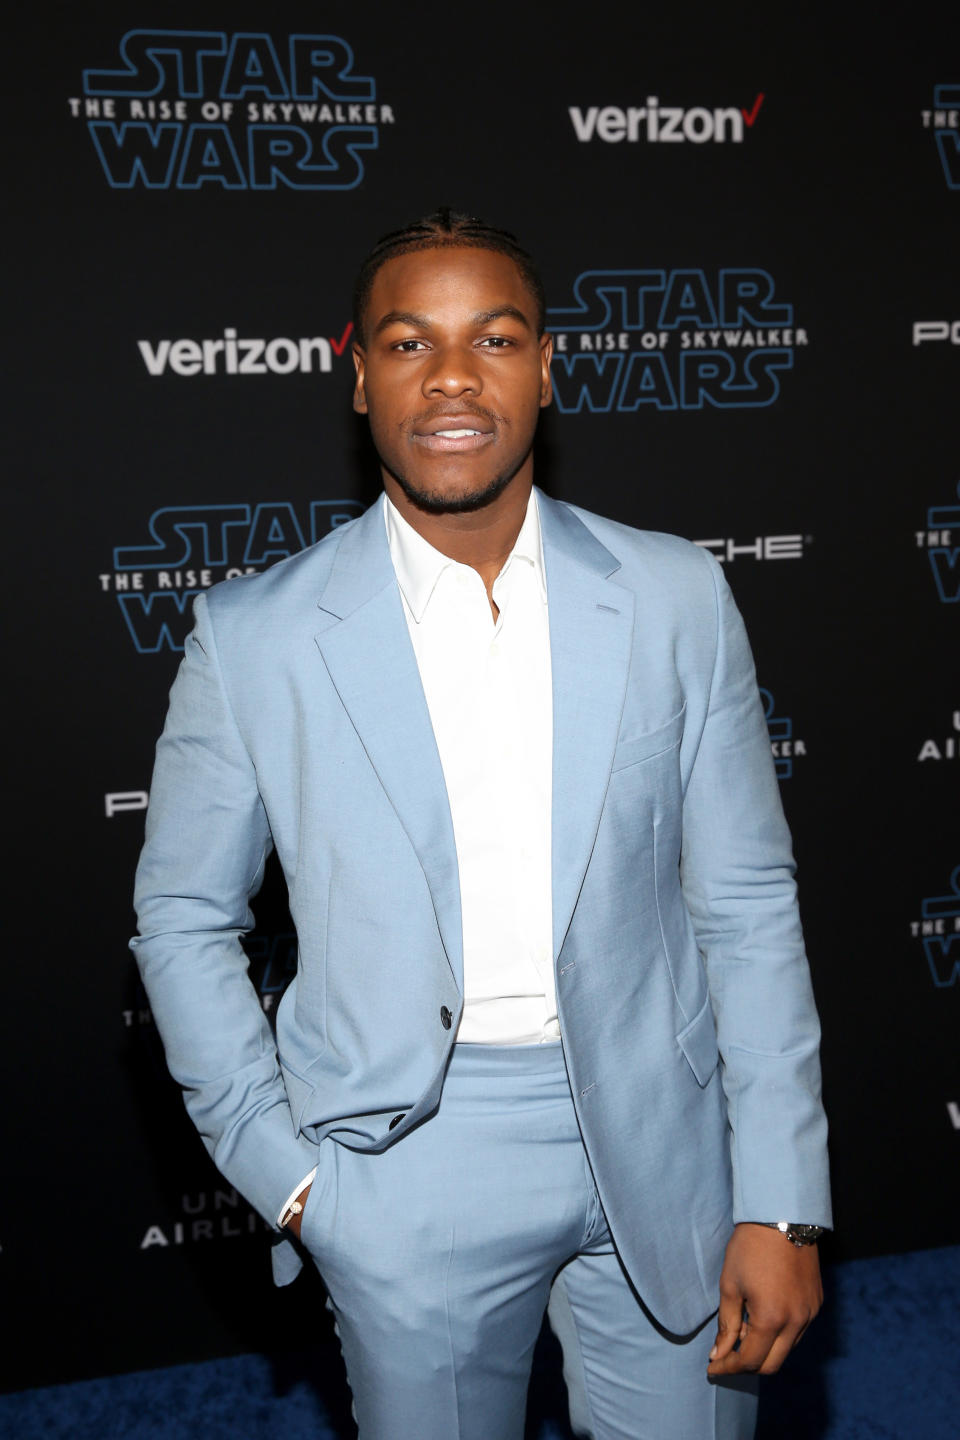 Boyega at the premiere for "Star Wars: The Rise of Skywalker" in 2019